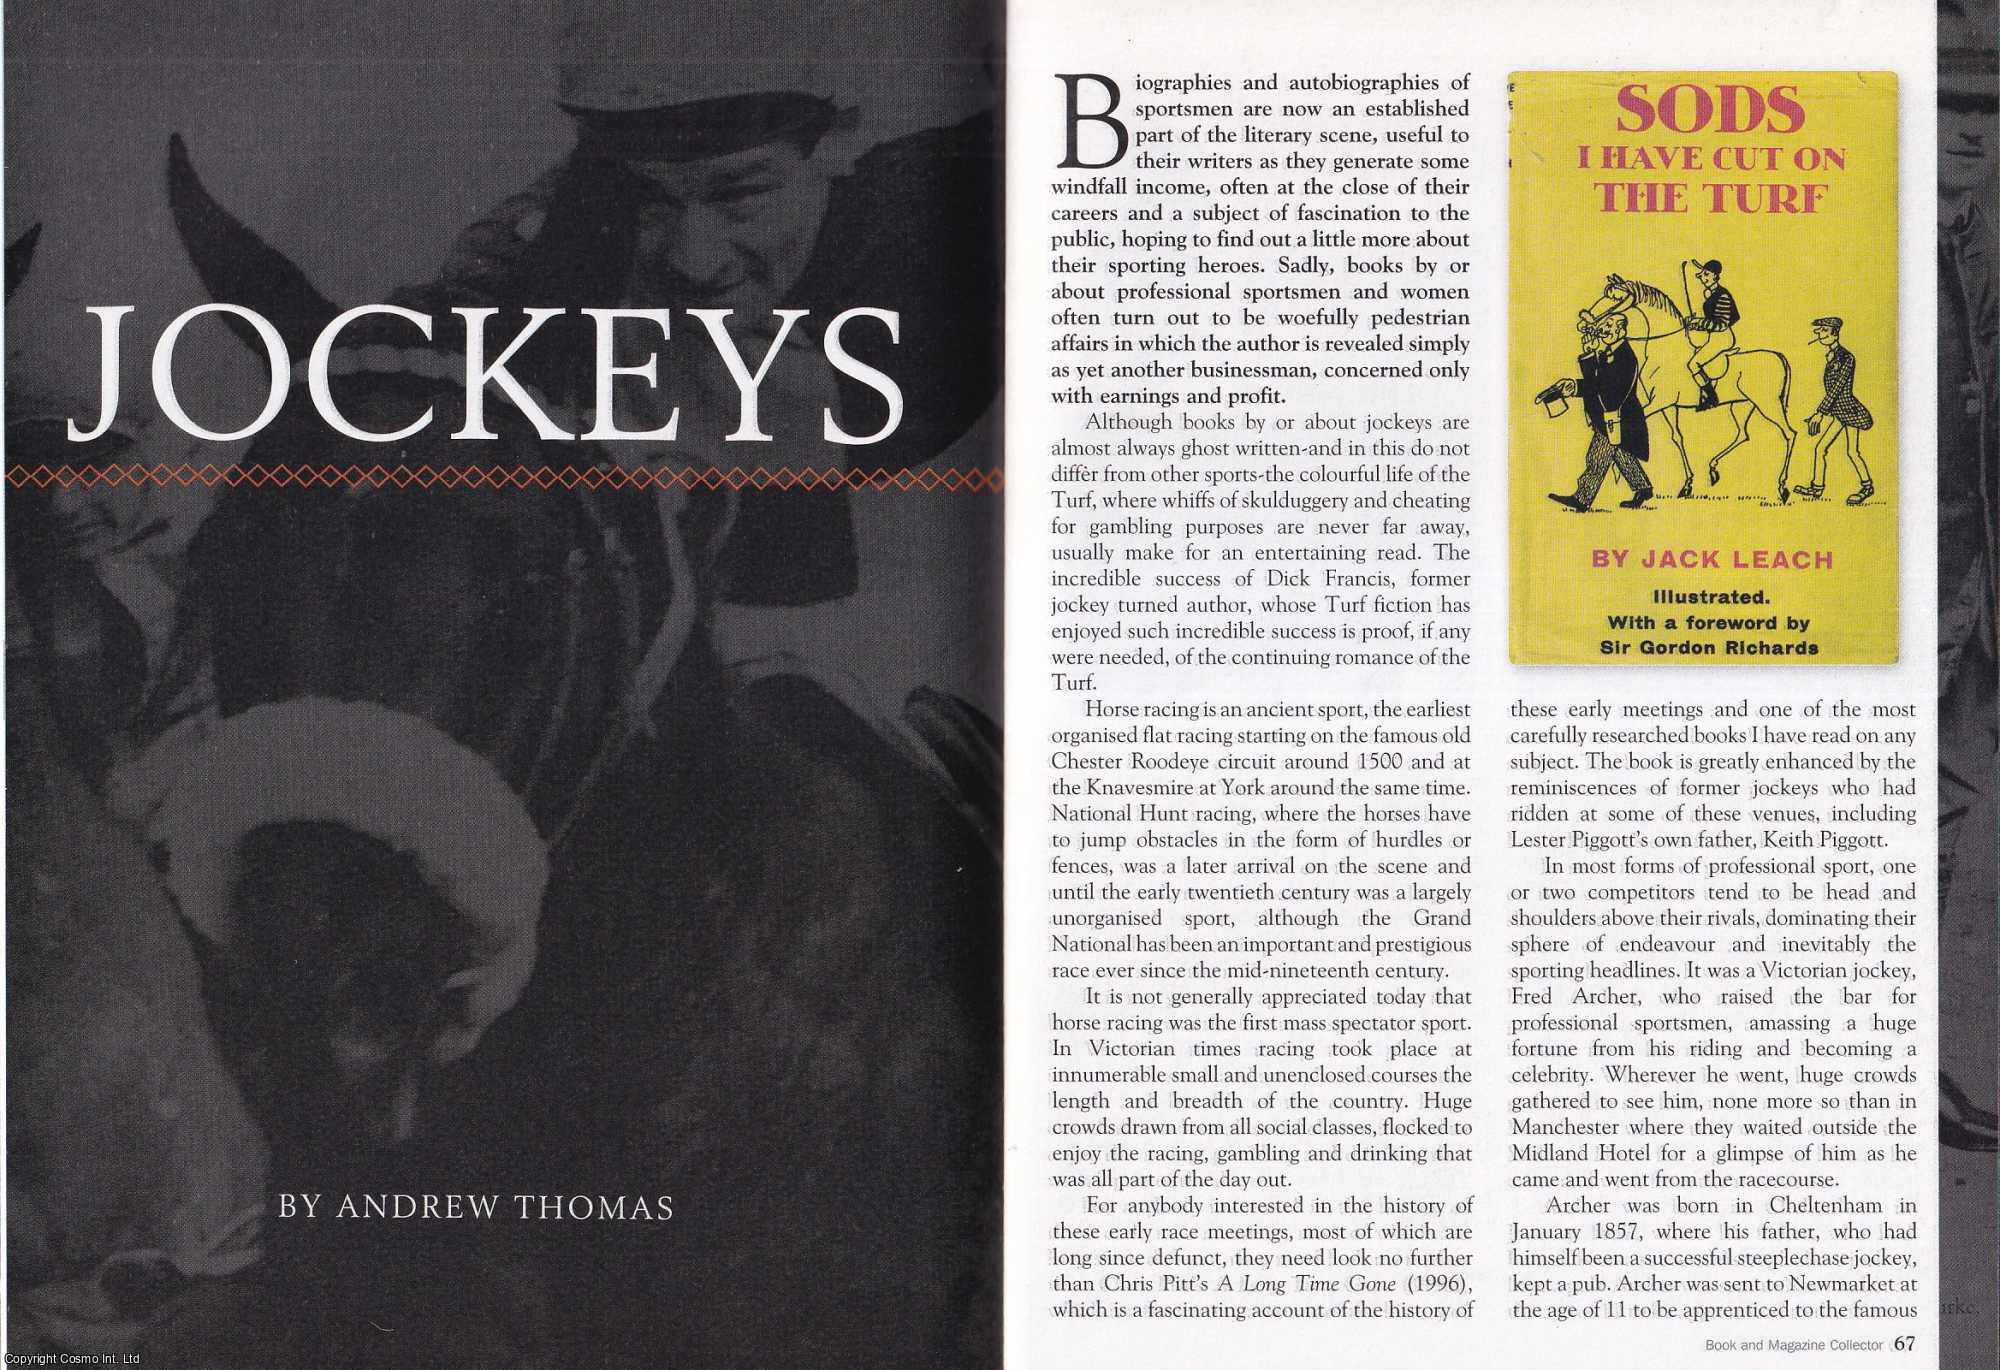 Andrew Thomas - Jockeys. This is an original article separated from an issue of The Book & Magazine Collector publication.